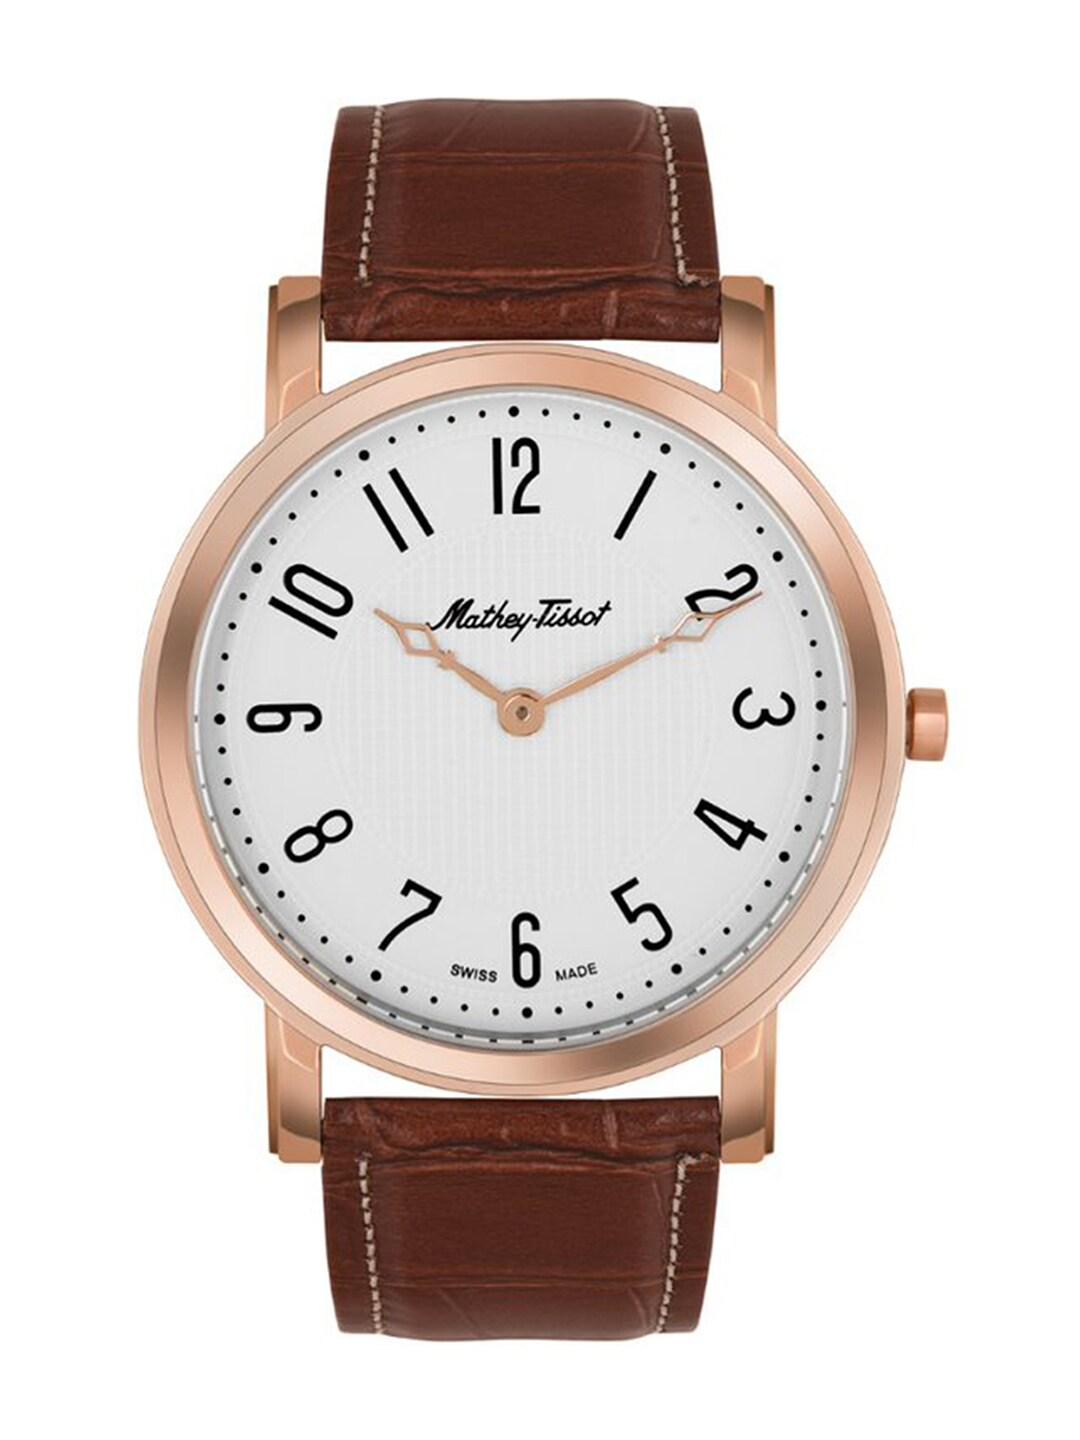 Mathey-Tissot Men White Brass Embellished Dial & Brown Leather Straps Analogue Watch HB611251SPG